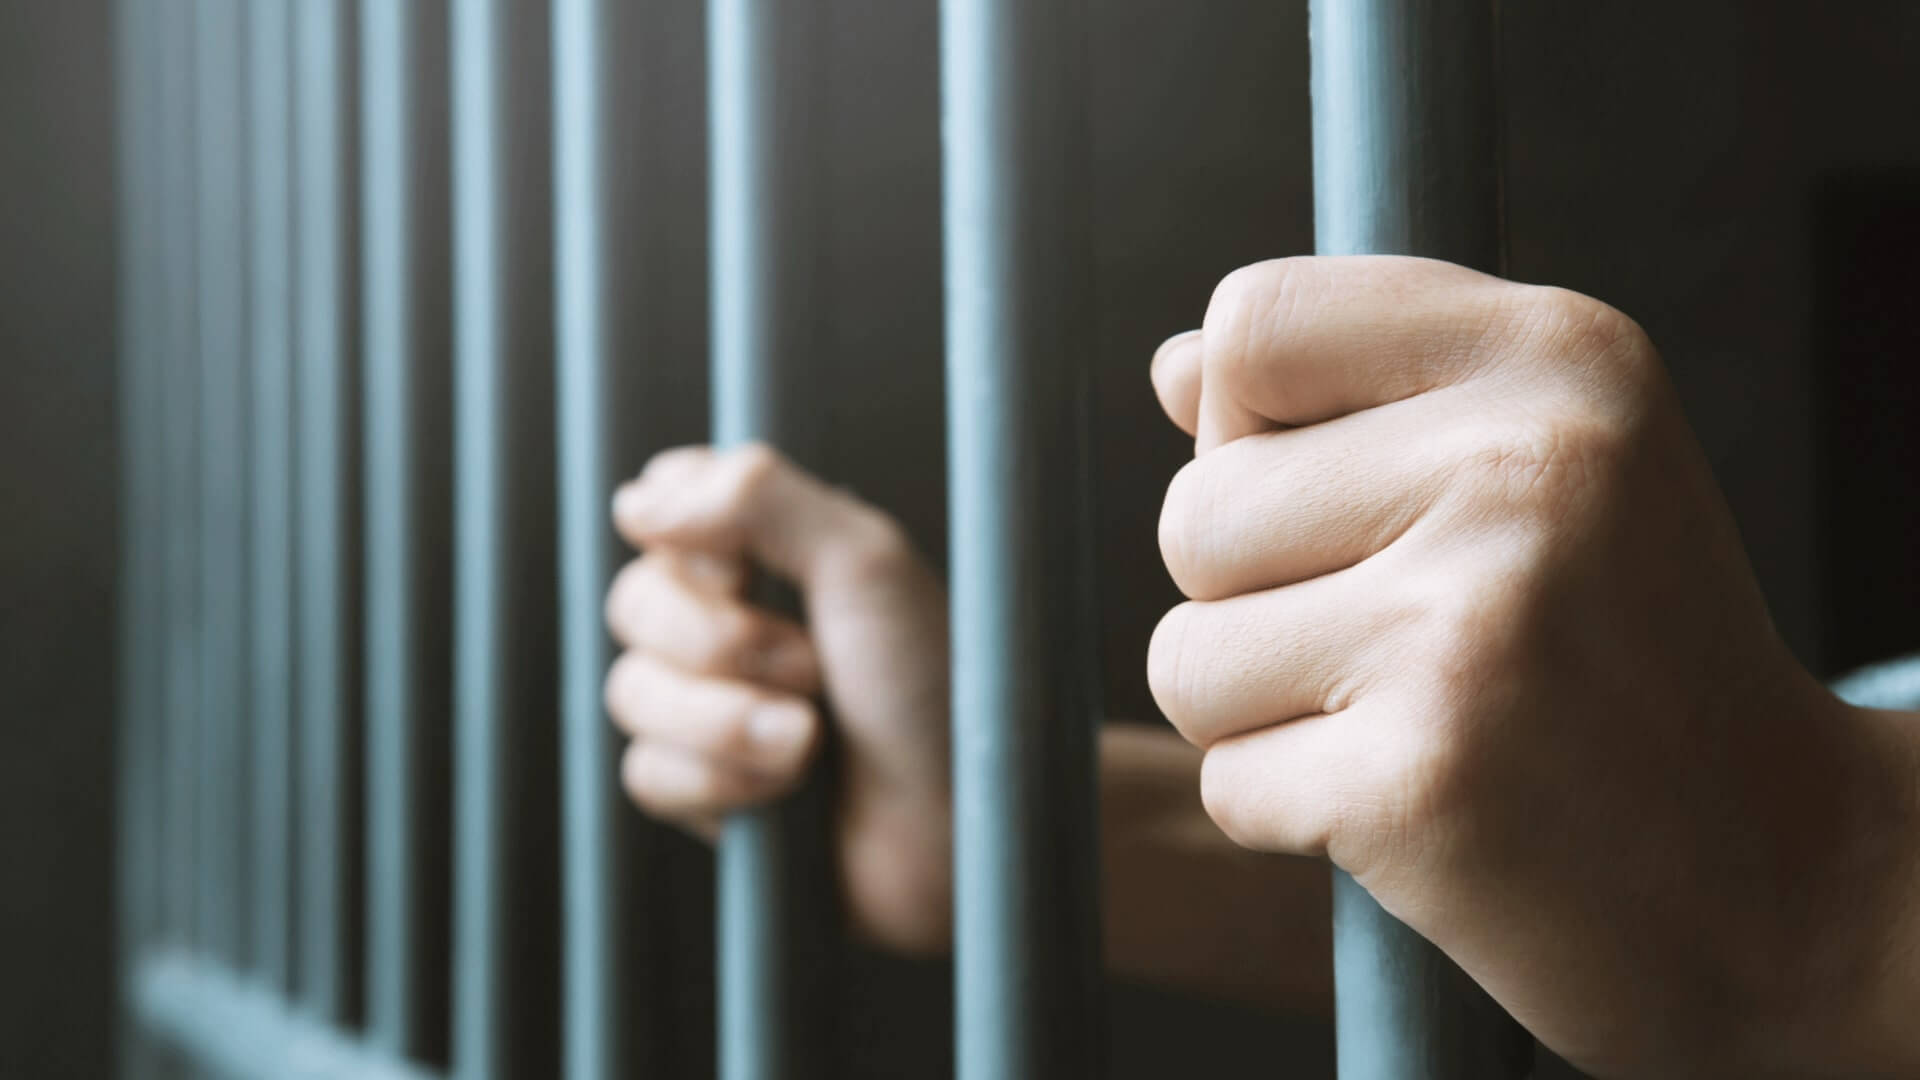 person locked up in jail holding onto jailbars